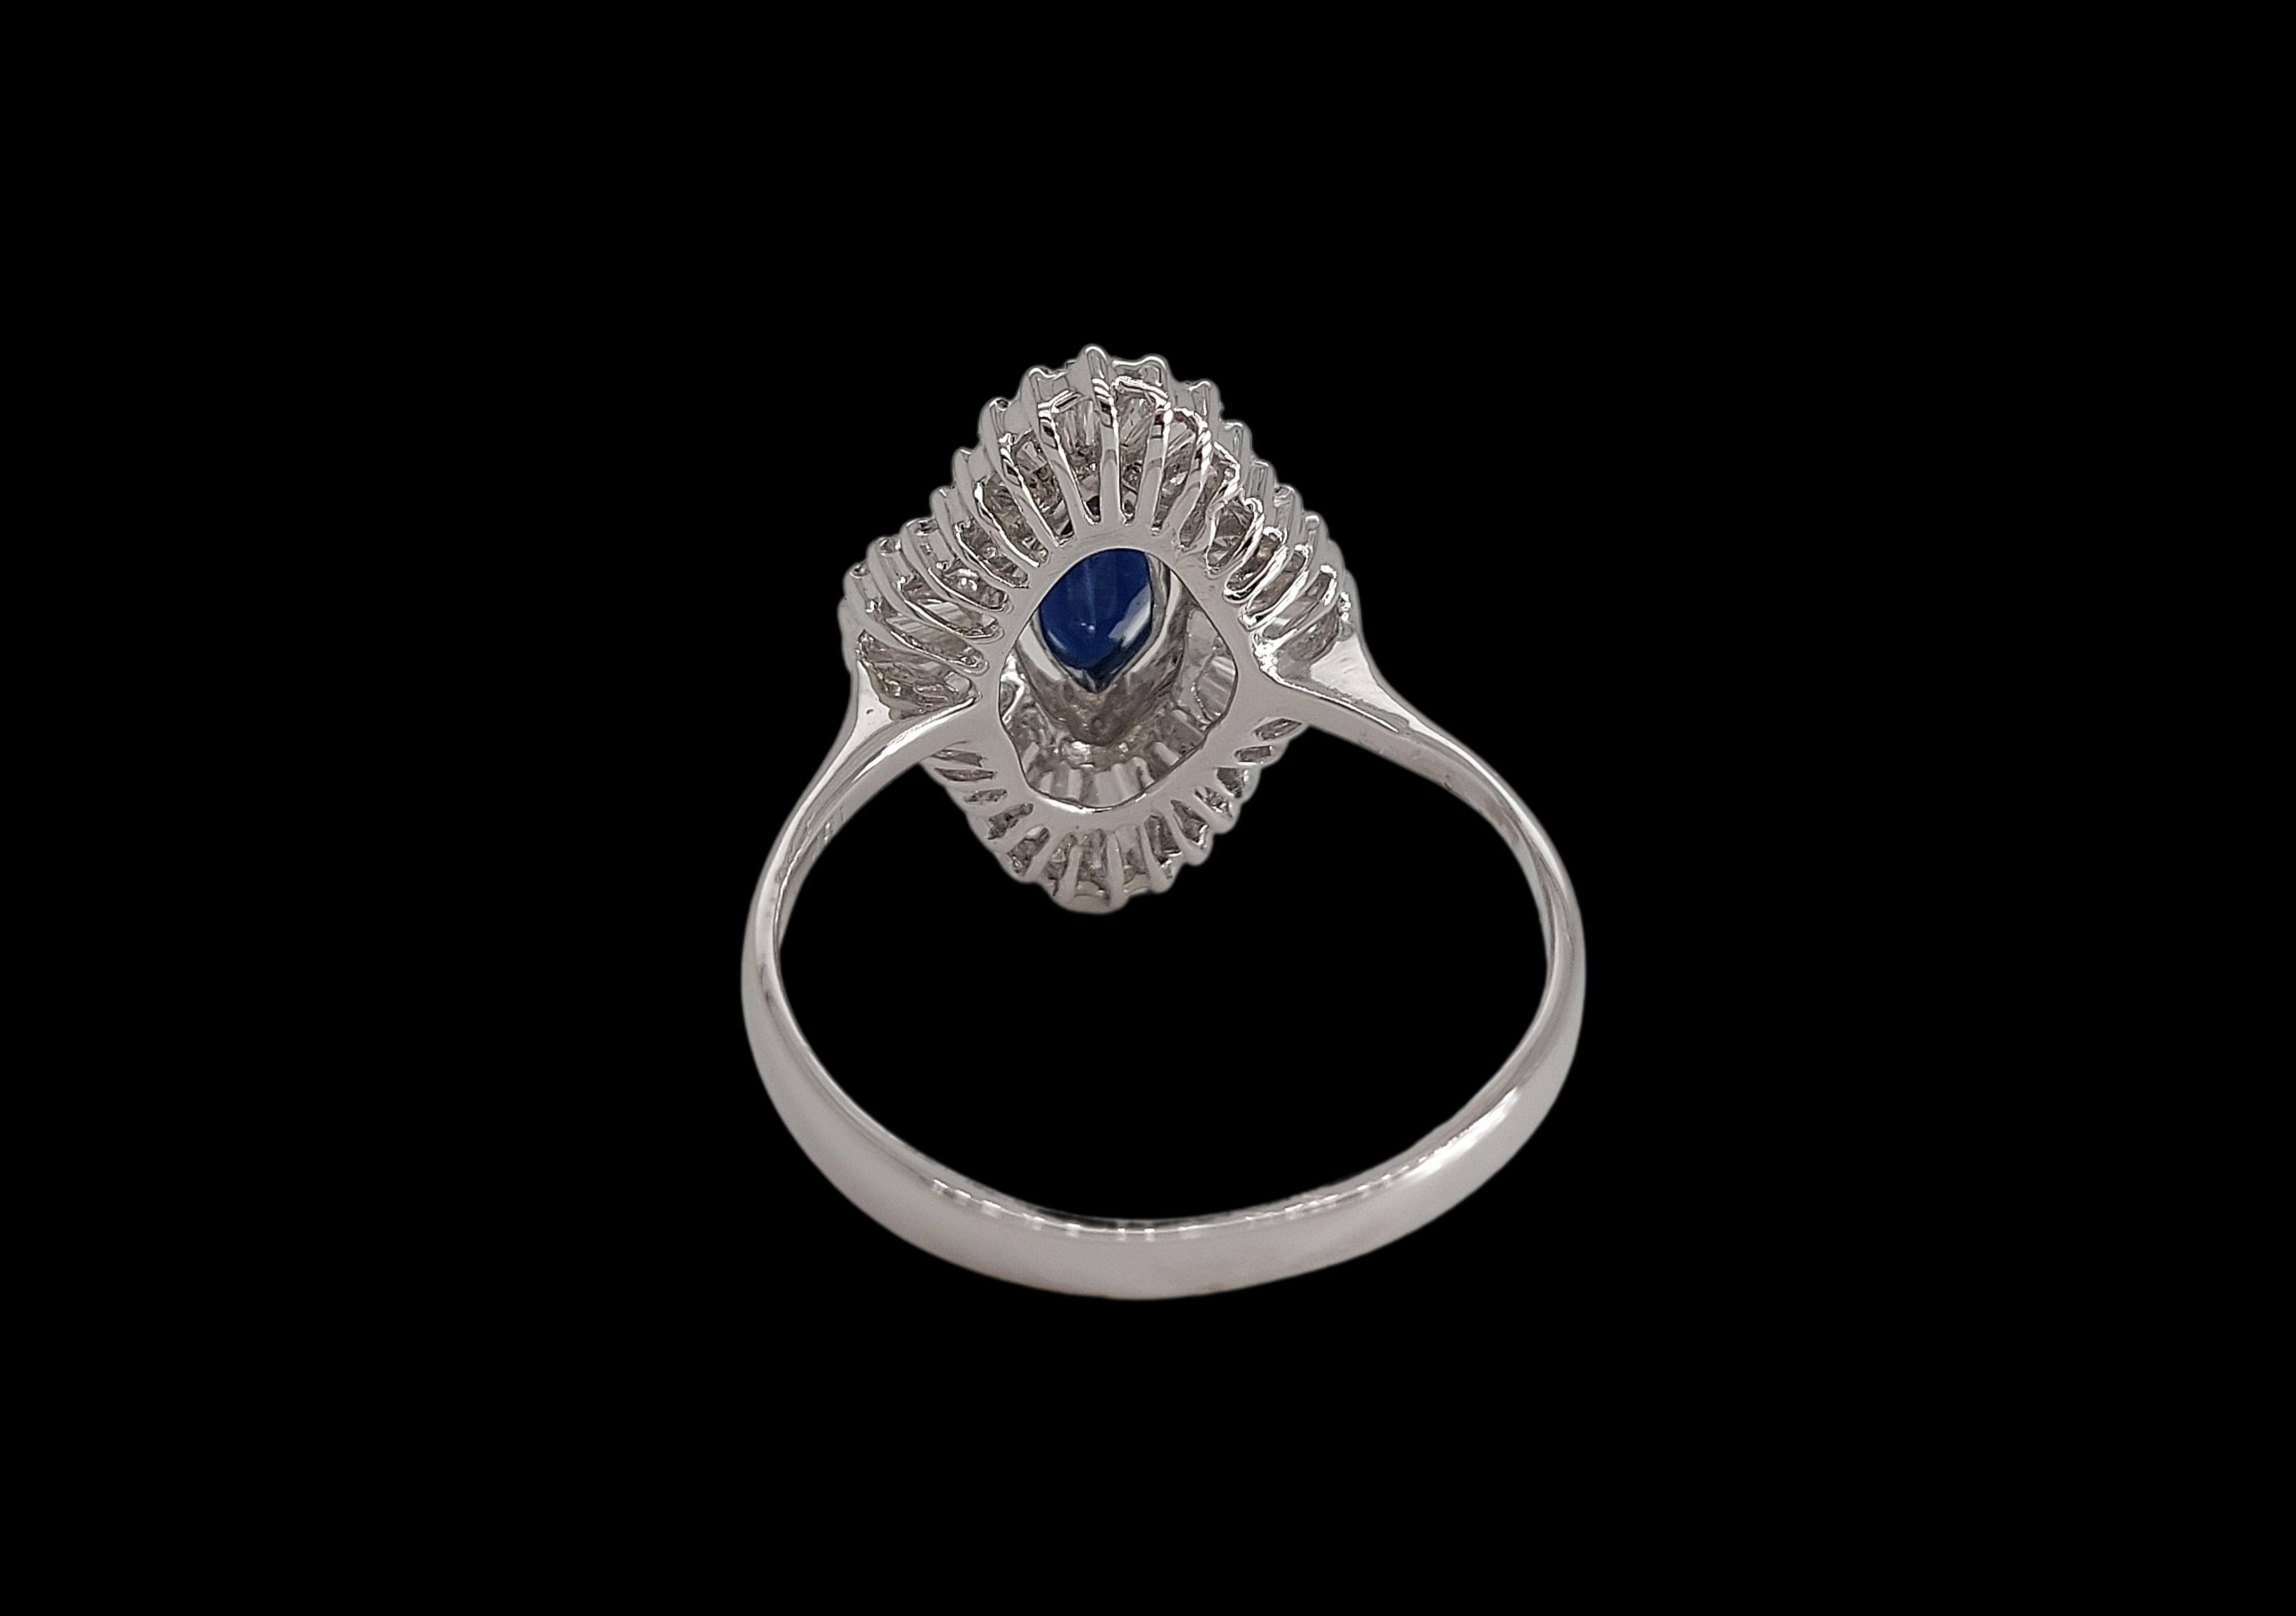 18kt White Gold Ring with 1.02ct Marquise Cut Sapphire and 2.4ct Diamonds For Sale 5